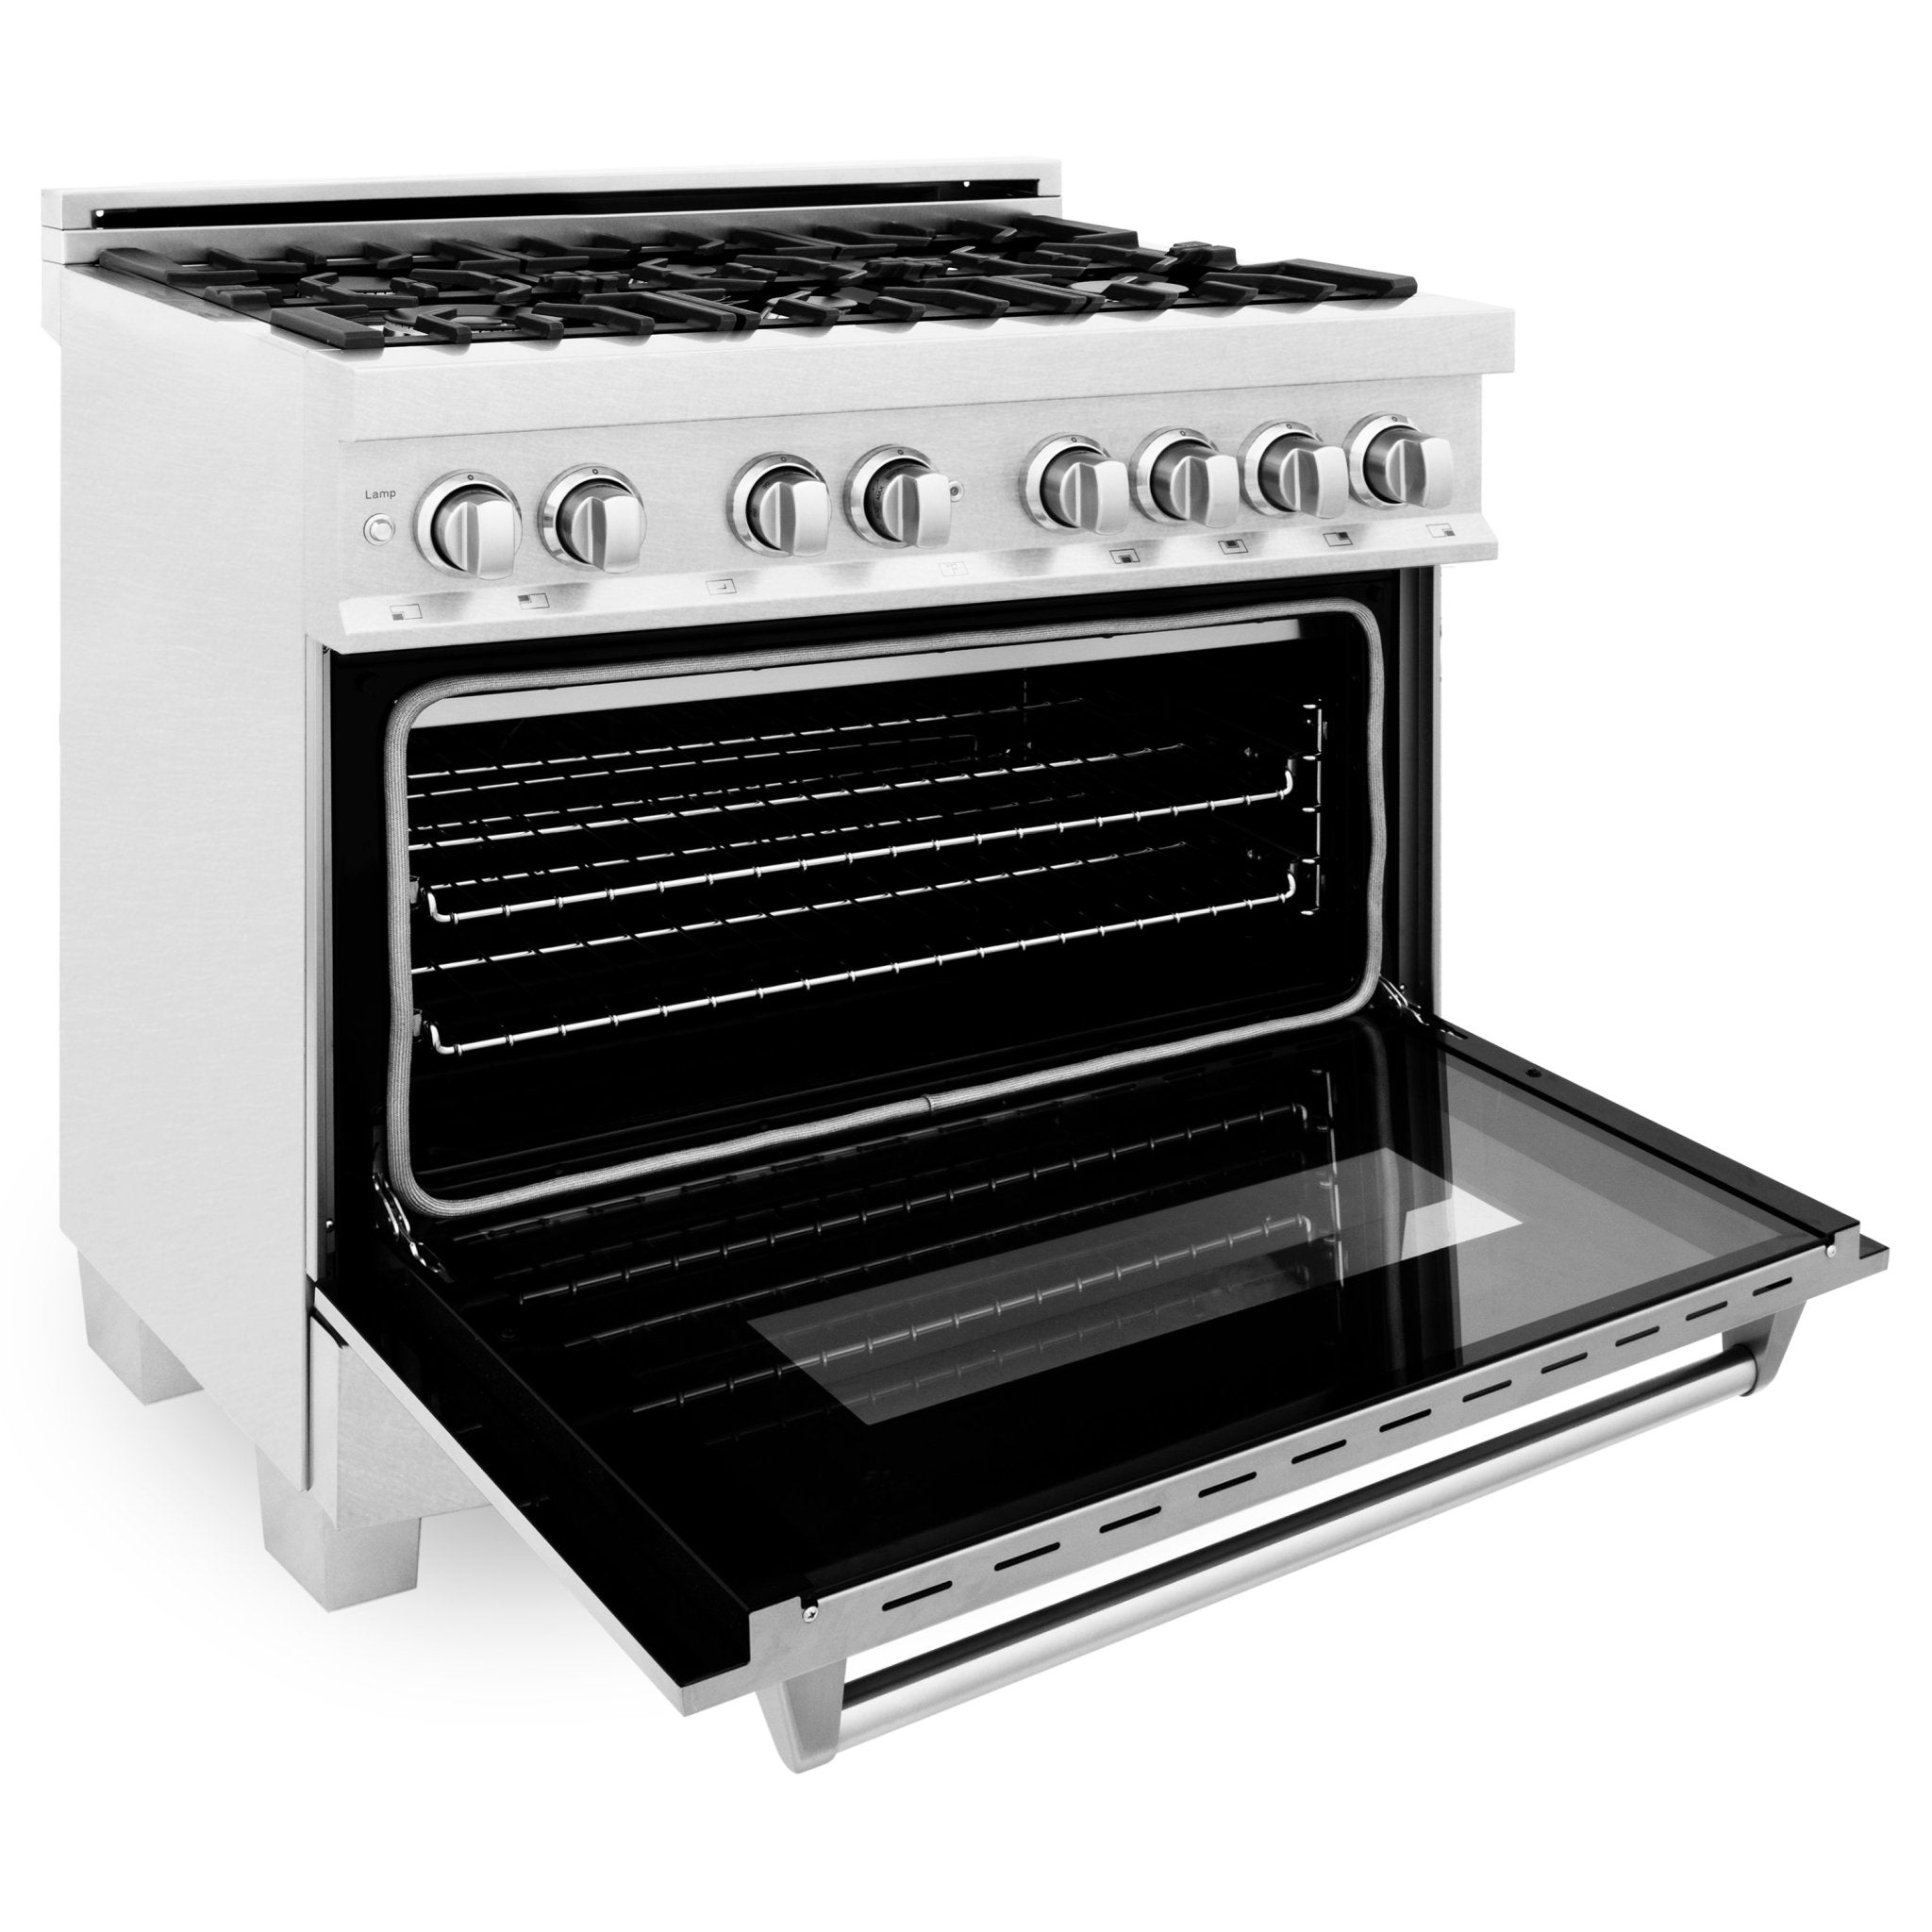 ZLINE 36 in. Professional Dual Fuel Range in DuraSnow Stainless Steel with Color Door Finishes (RAS-SN-36) - New Star Living